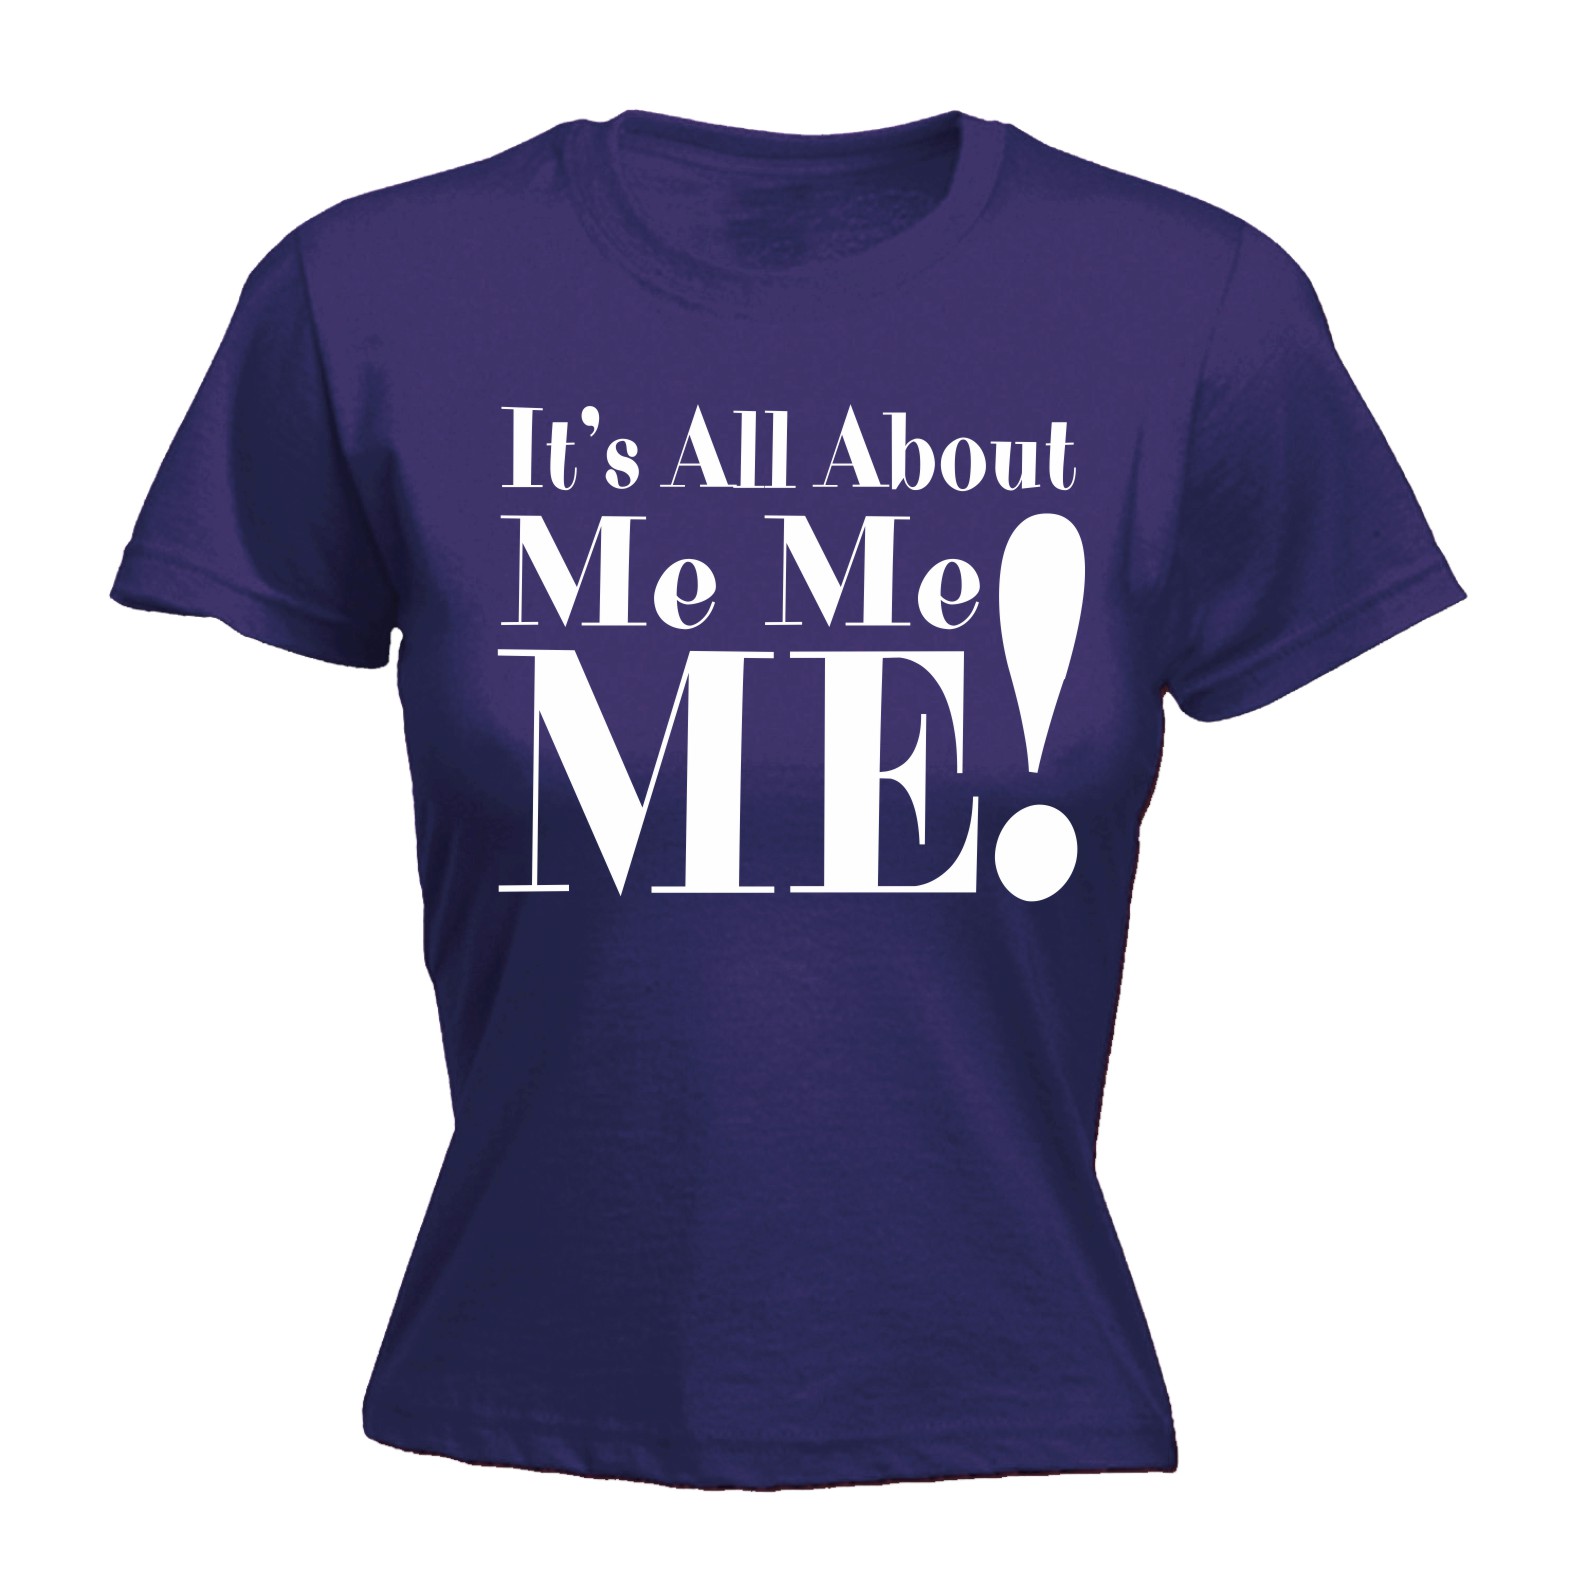 Womens Its All About Me Funny Joke Comedy Cool FITTED T-SHIRT birthday